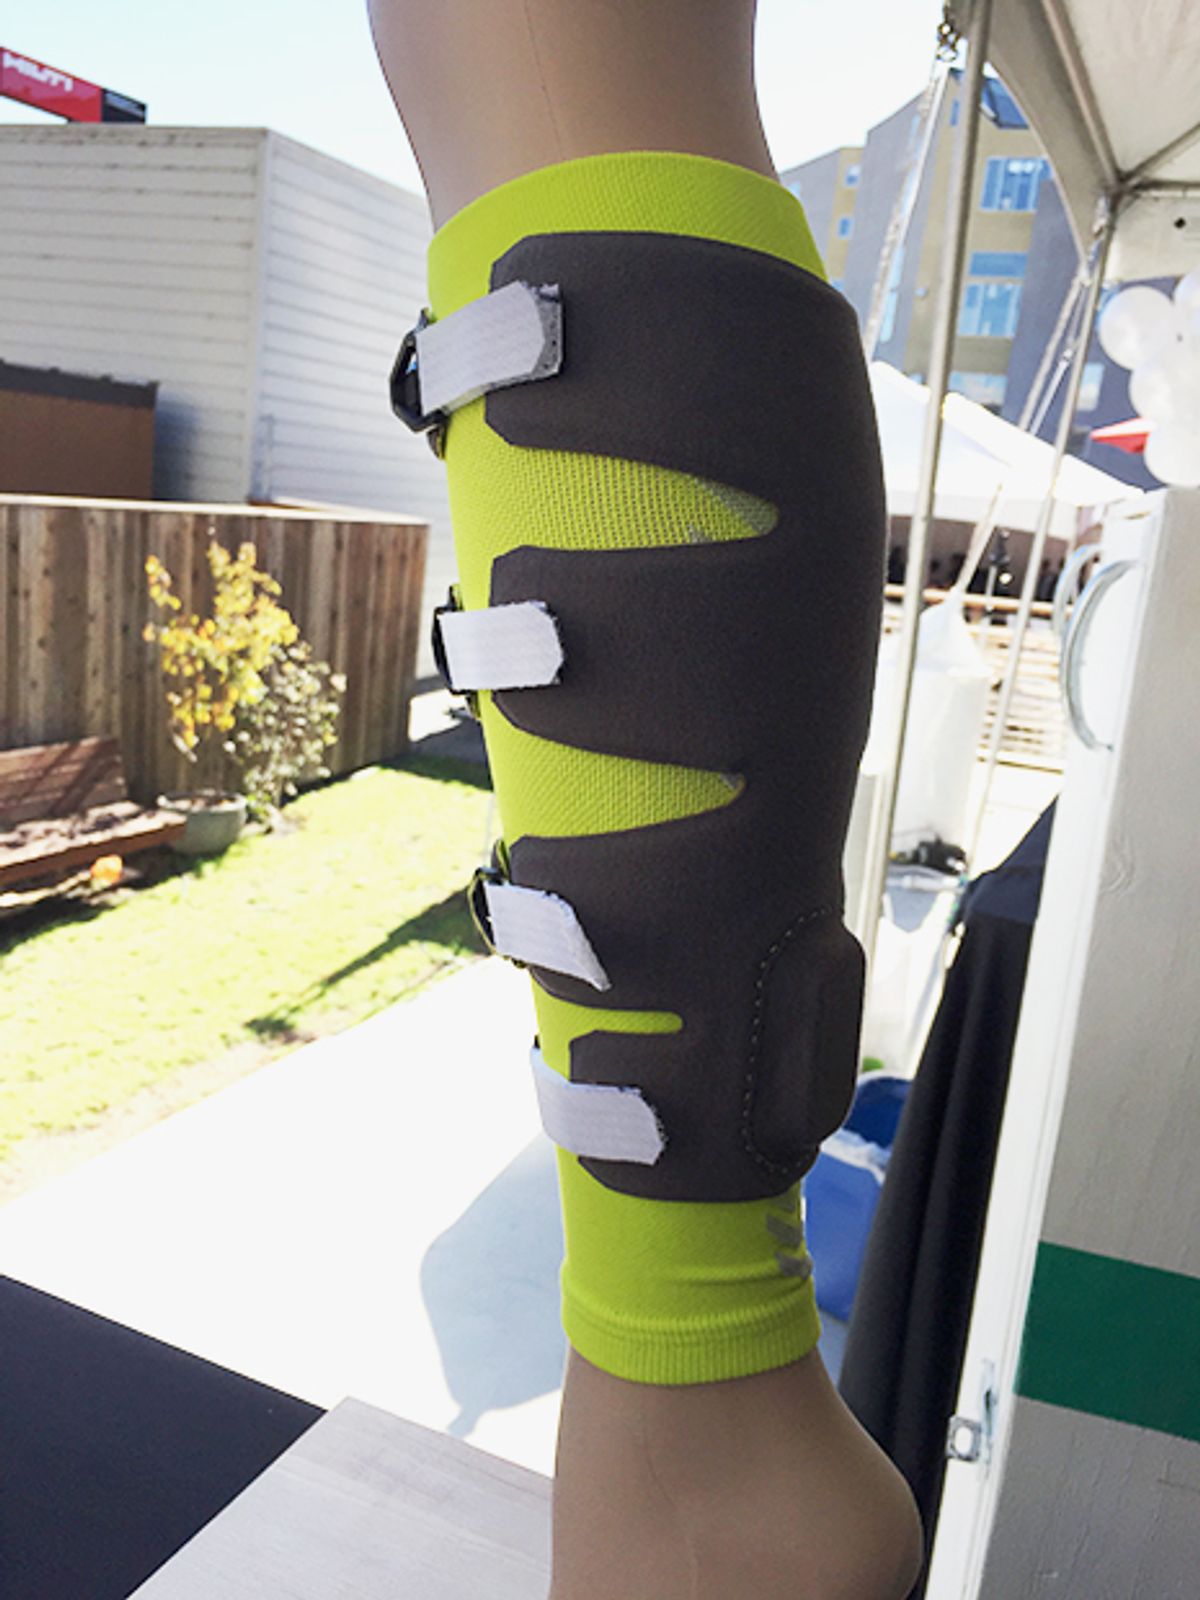 Sculpted Bone Healing, Active Leg Compression, and More from Health Device Startups